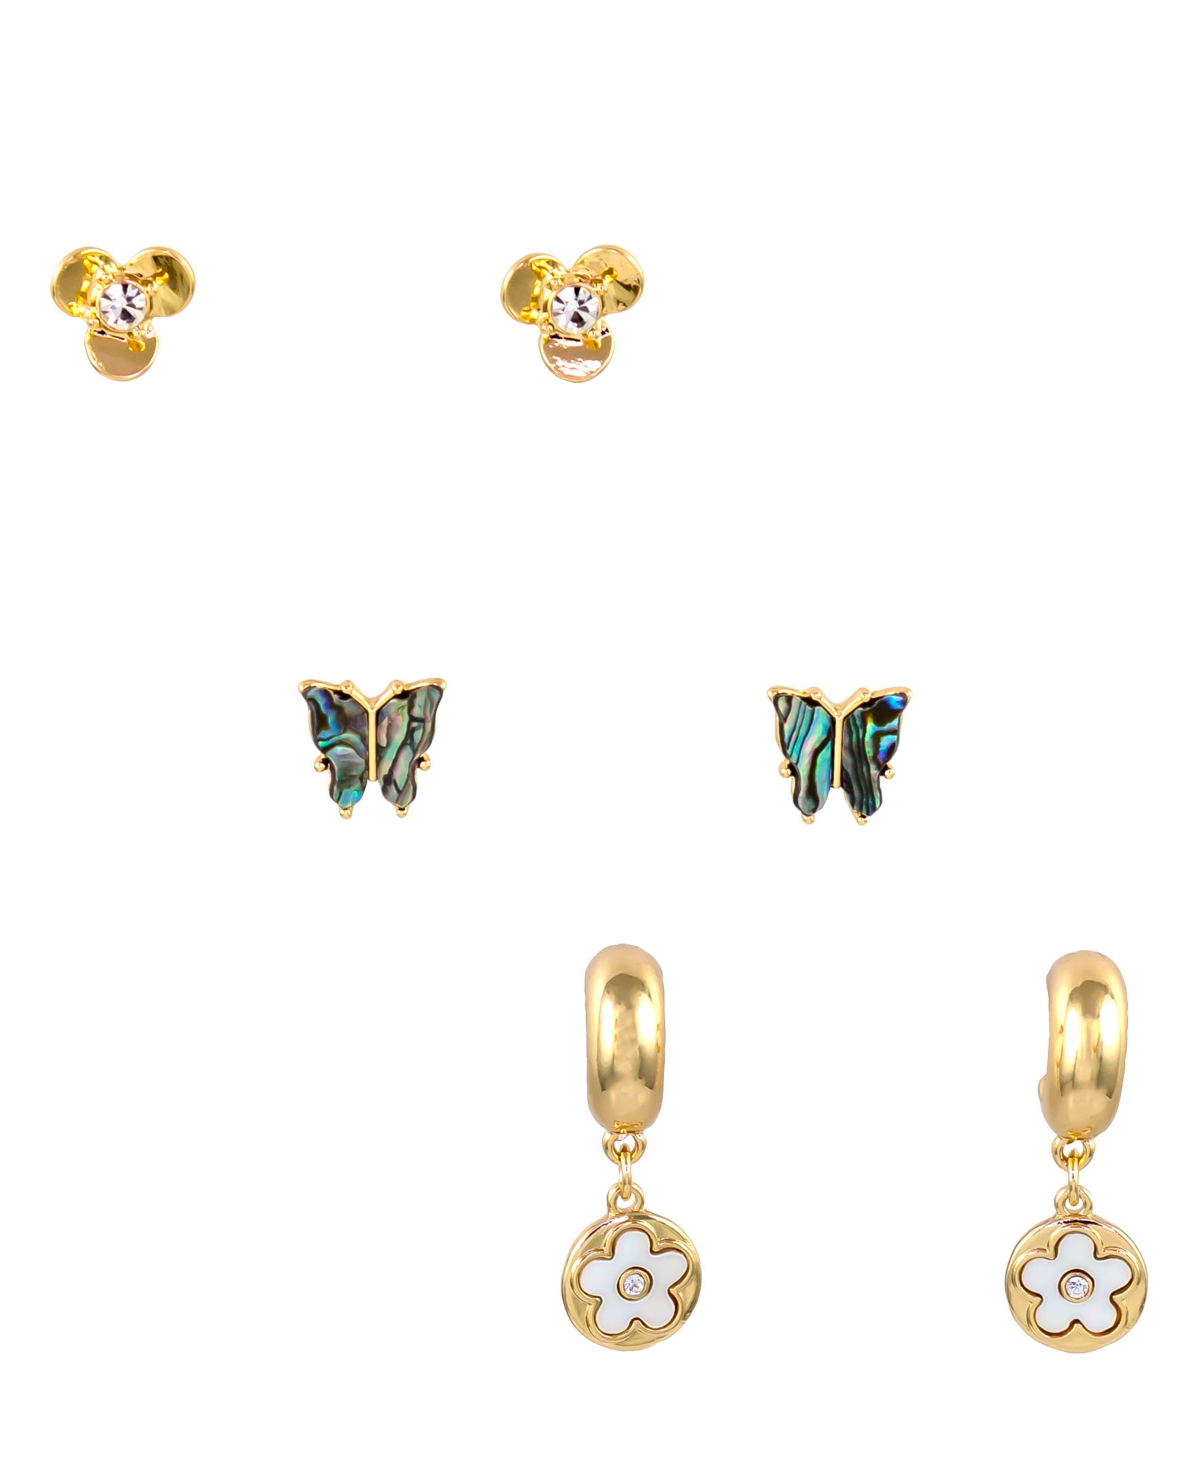 Laura Ashley Stud Earring Set, 6 Piece In Abalone